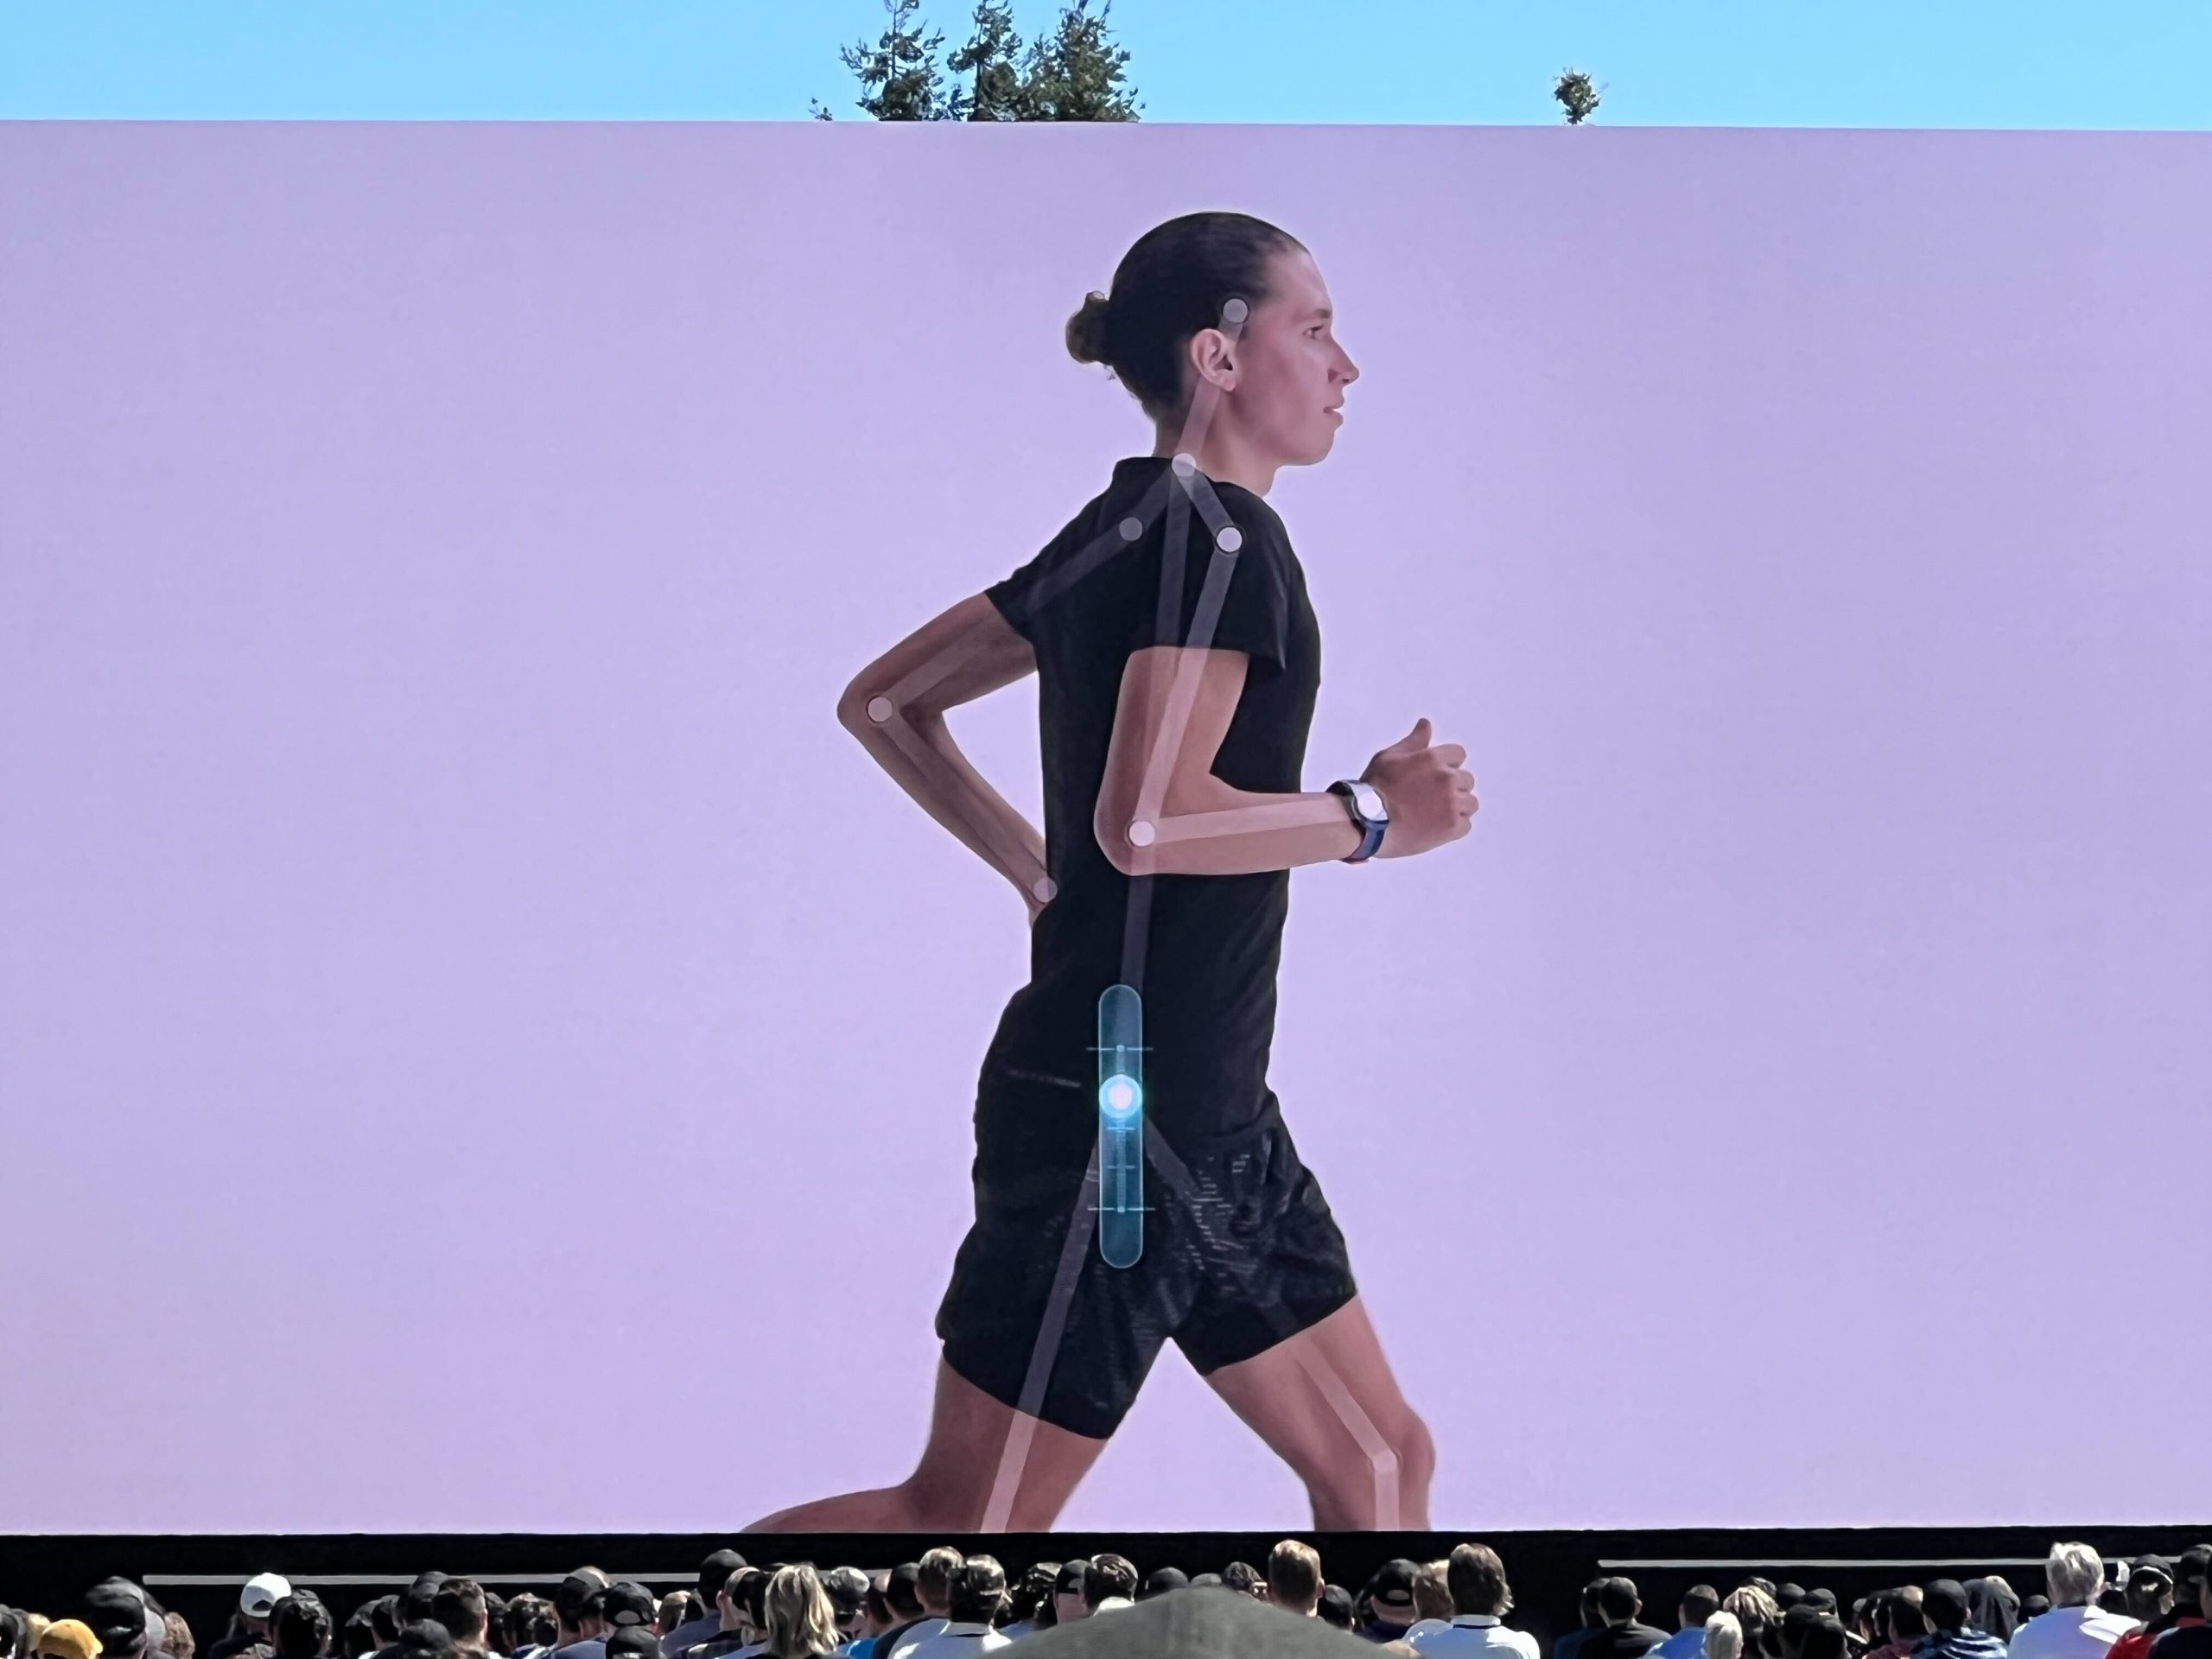 watchOS 9: New fitness metrics, sports modes, health features, updates & more